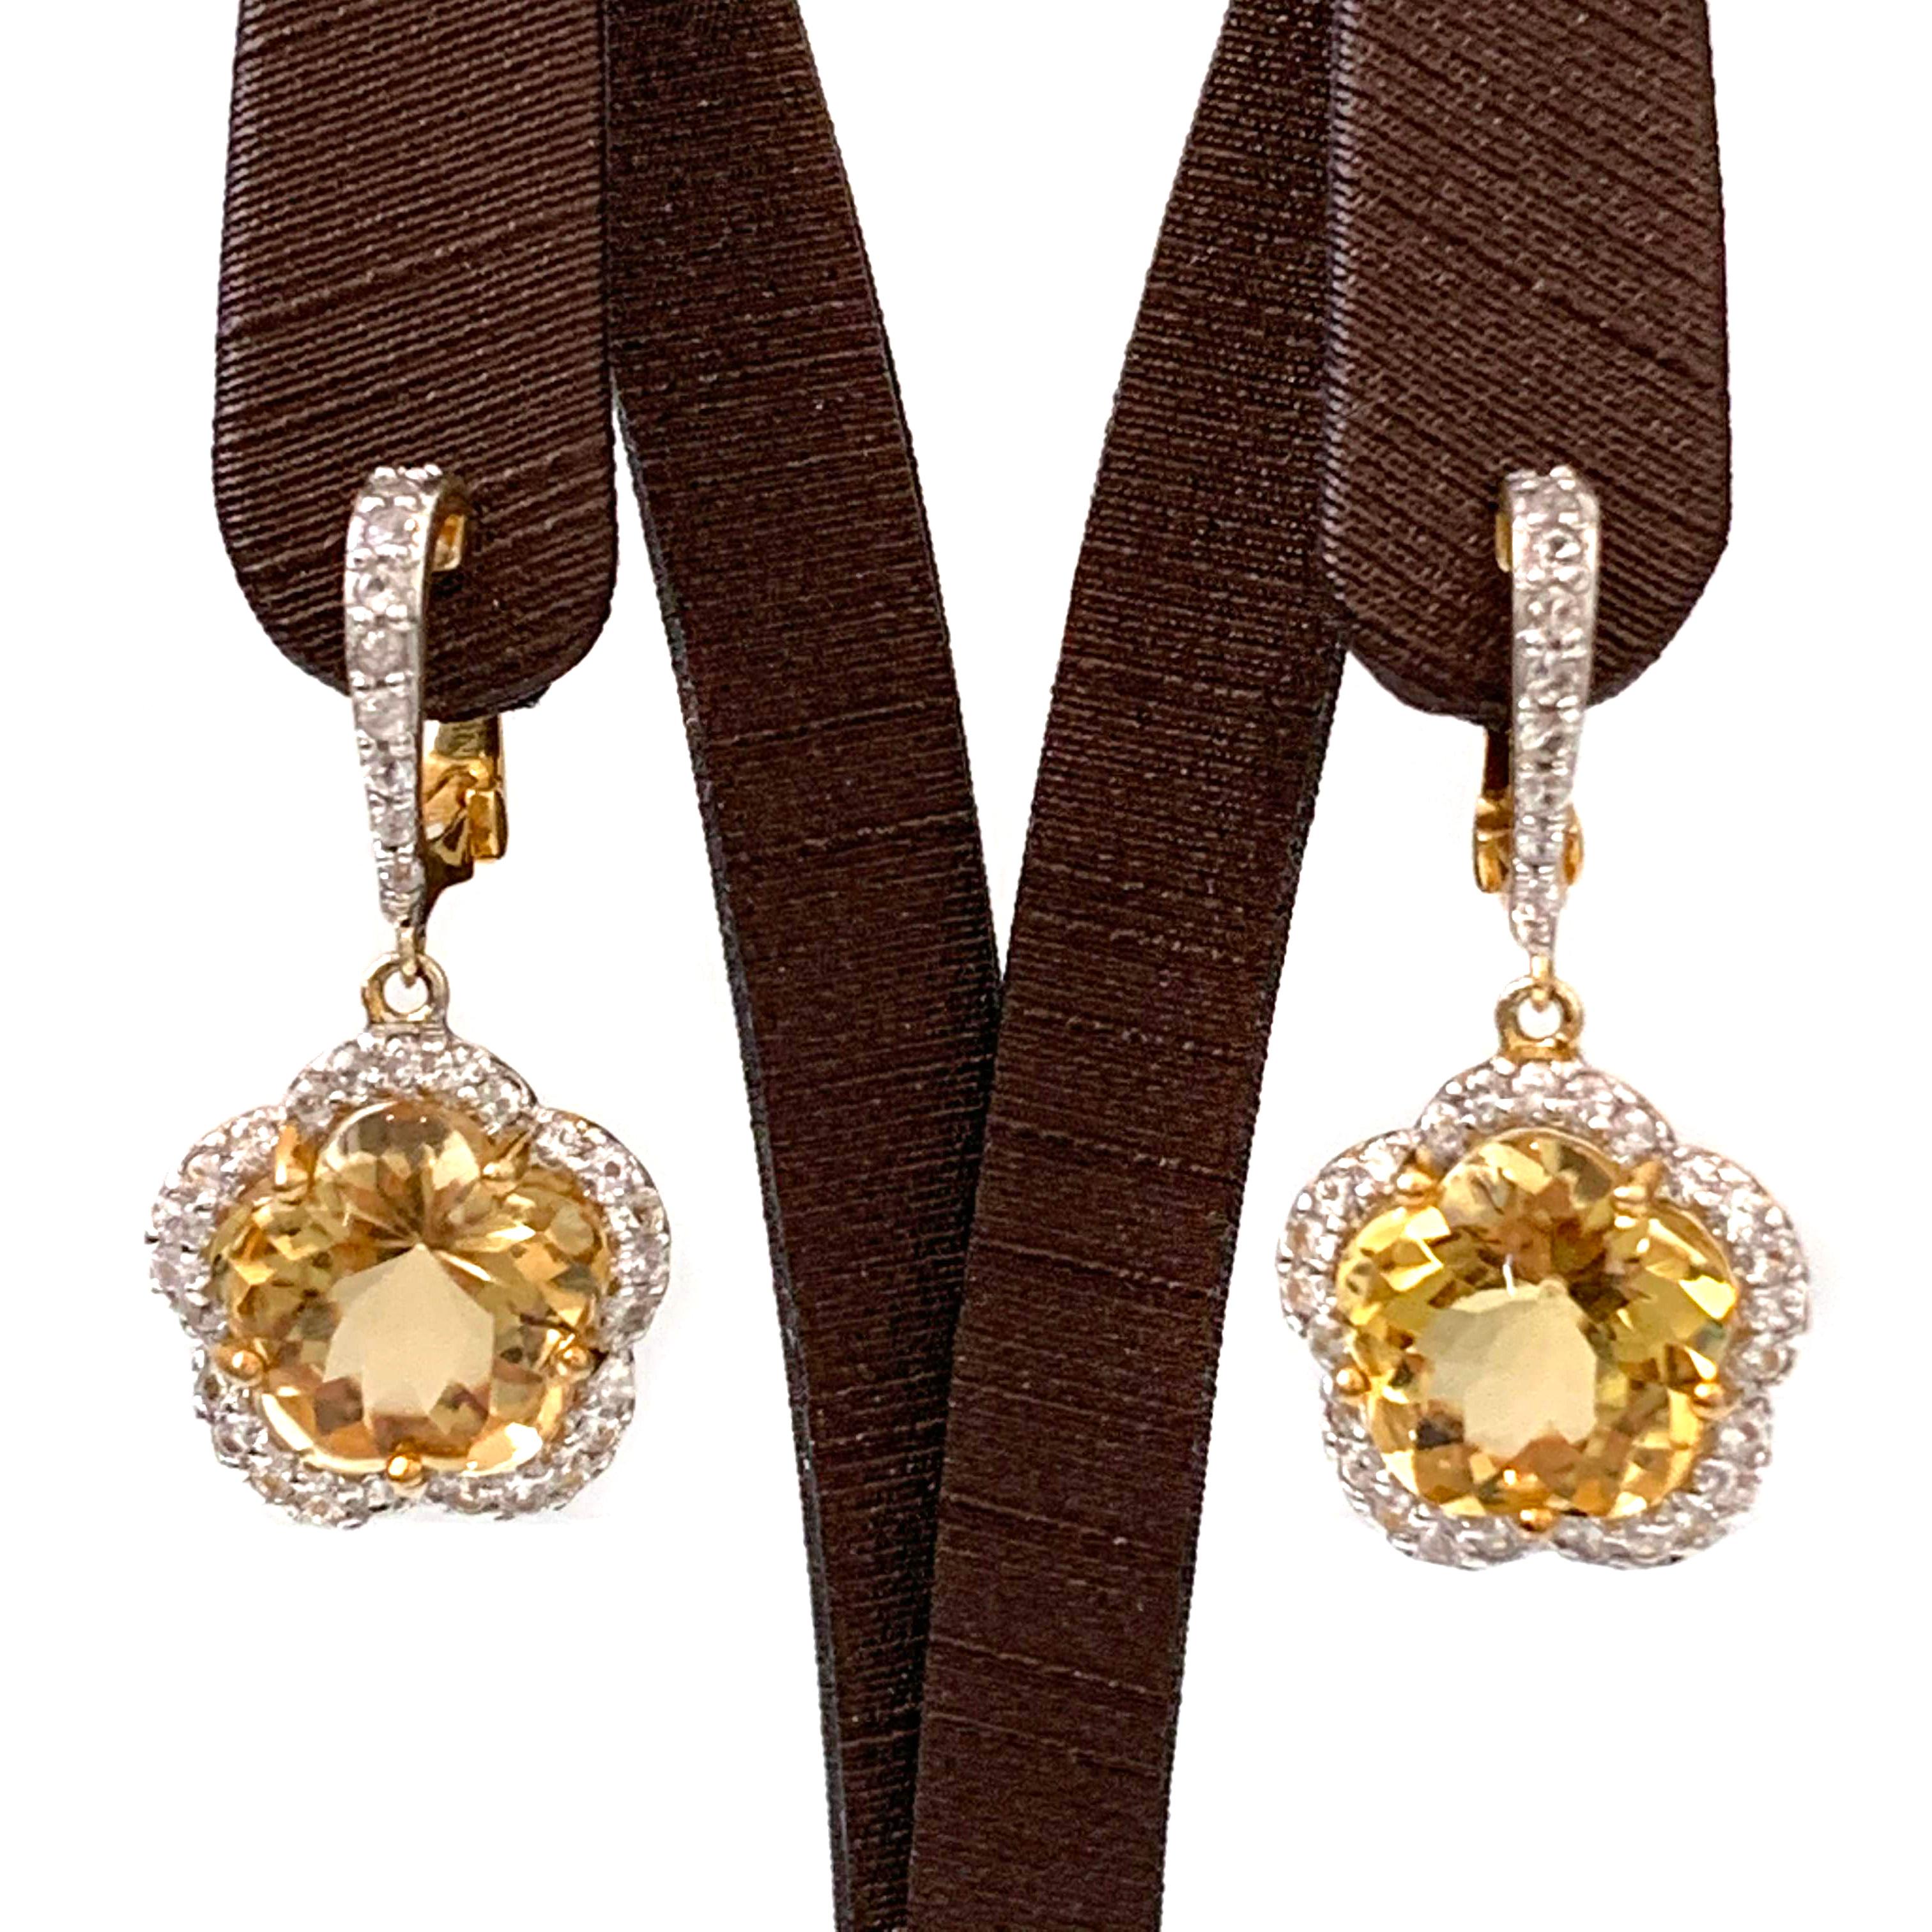 Beautiful Flower Citrine & White Sapphire Earrings

The earrings feature 2 beautiful flower-shape cabochon/facet-cut genuine cirine (11mm size, 10ct total), adorned with 70pcs of round white sapphire, handset in 18k vermeil sterling silver. 

The